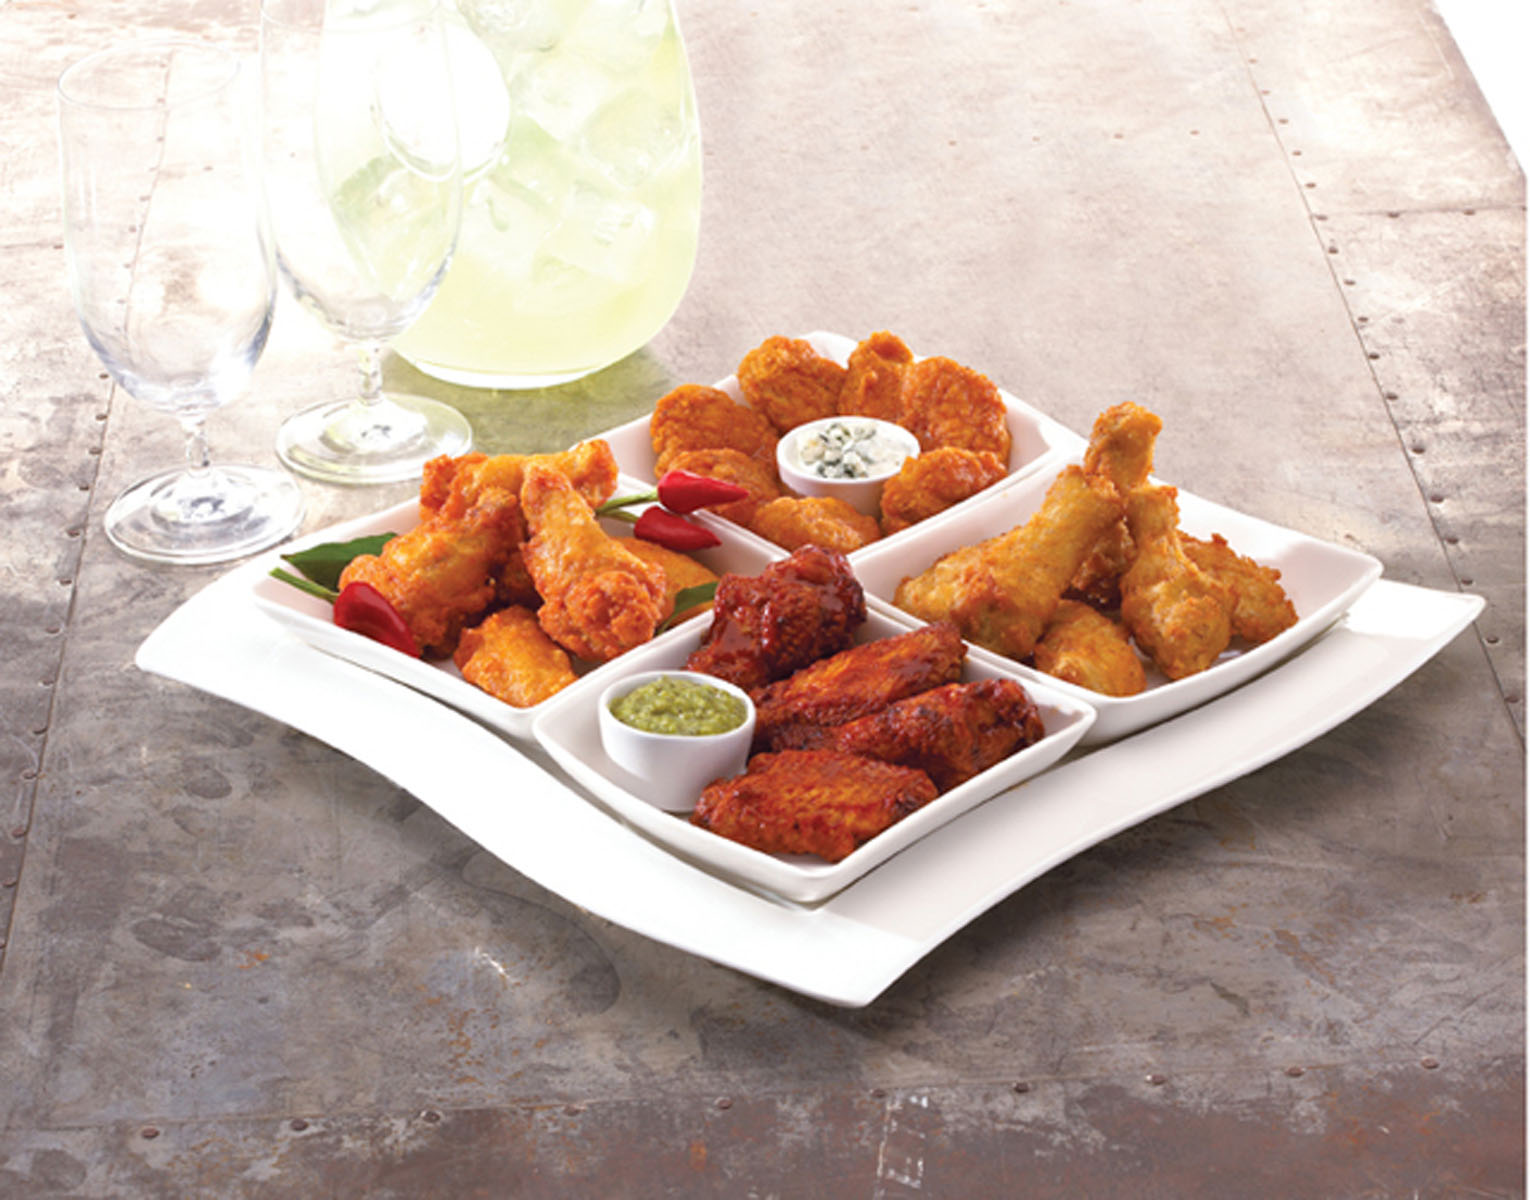 PERDUE® NO ANTIBIOTICS EVER, Fully Cooked, Spicy, Breaded, KICK 'N WINGS®, 1st and 2nd Sections, Small,…<br/>(82036)